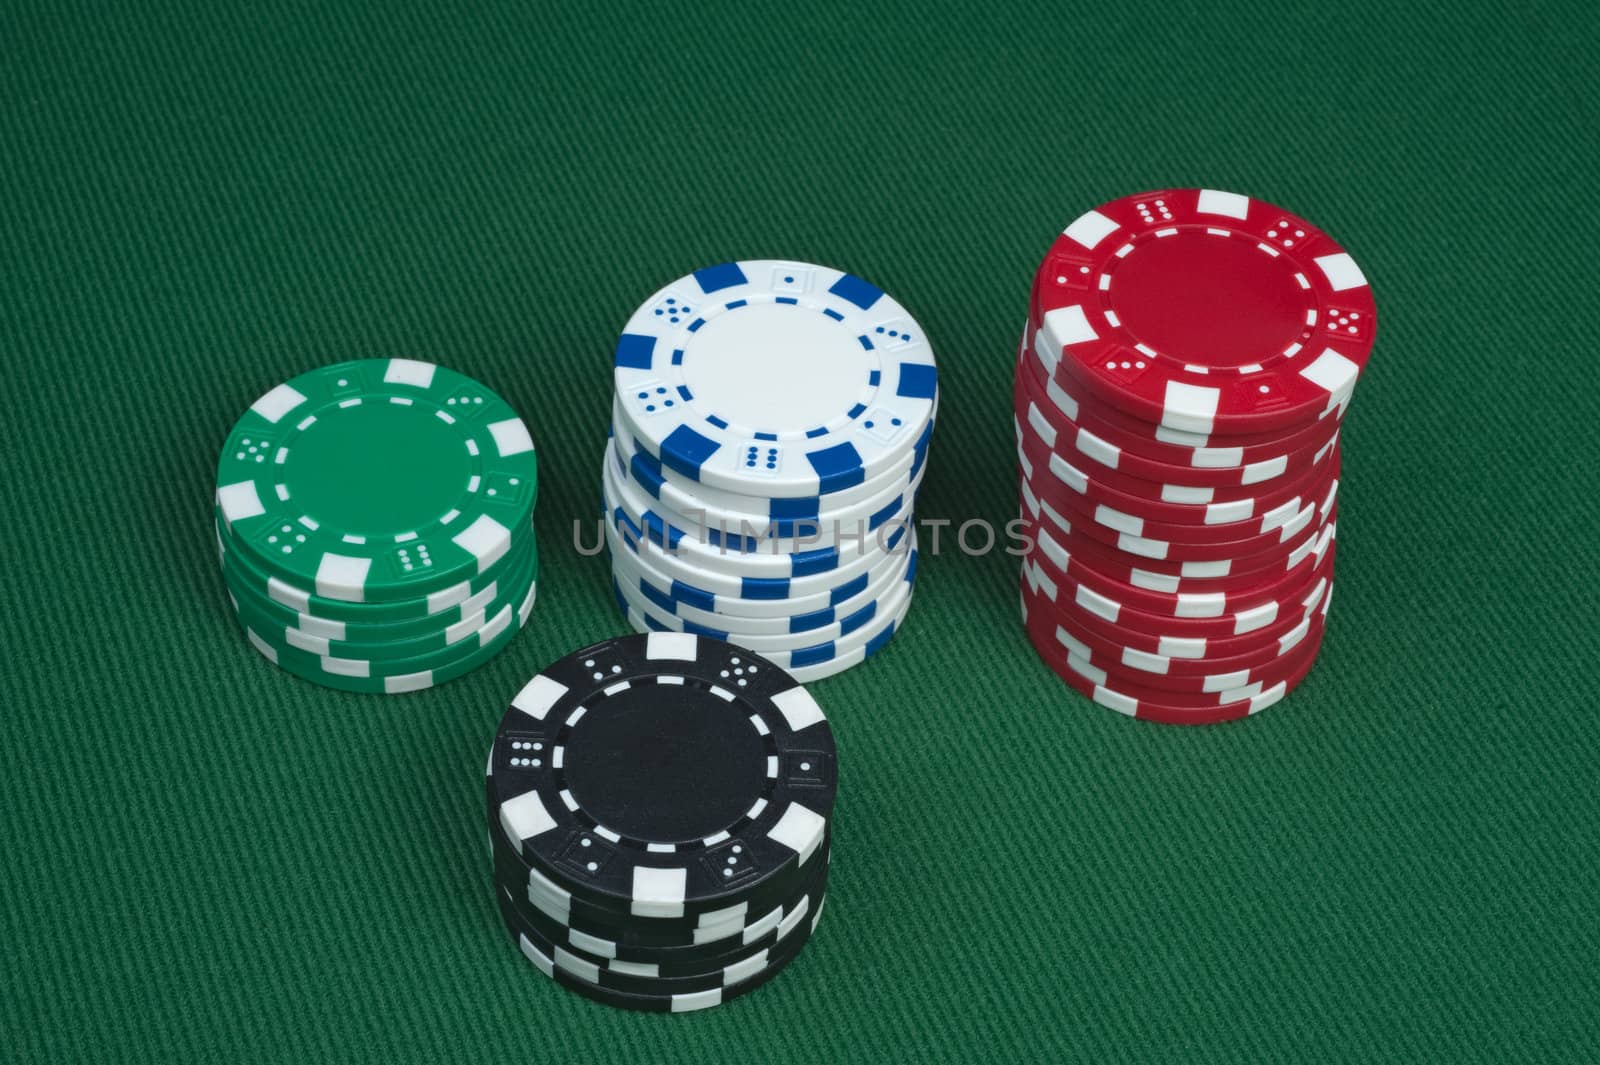 Poker chips by Marcus